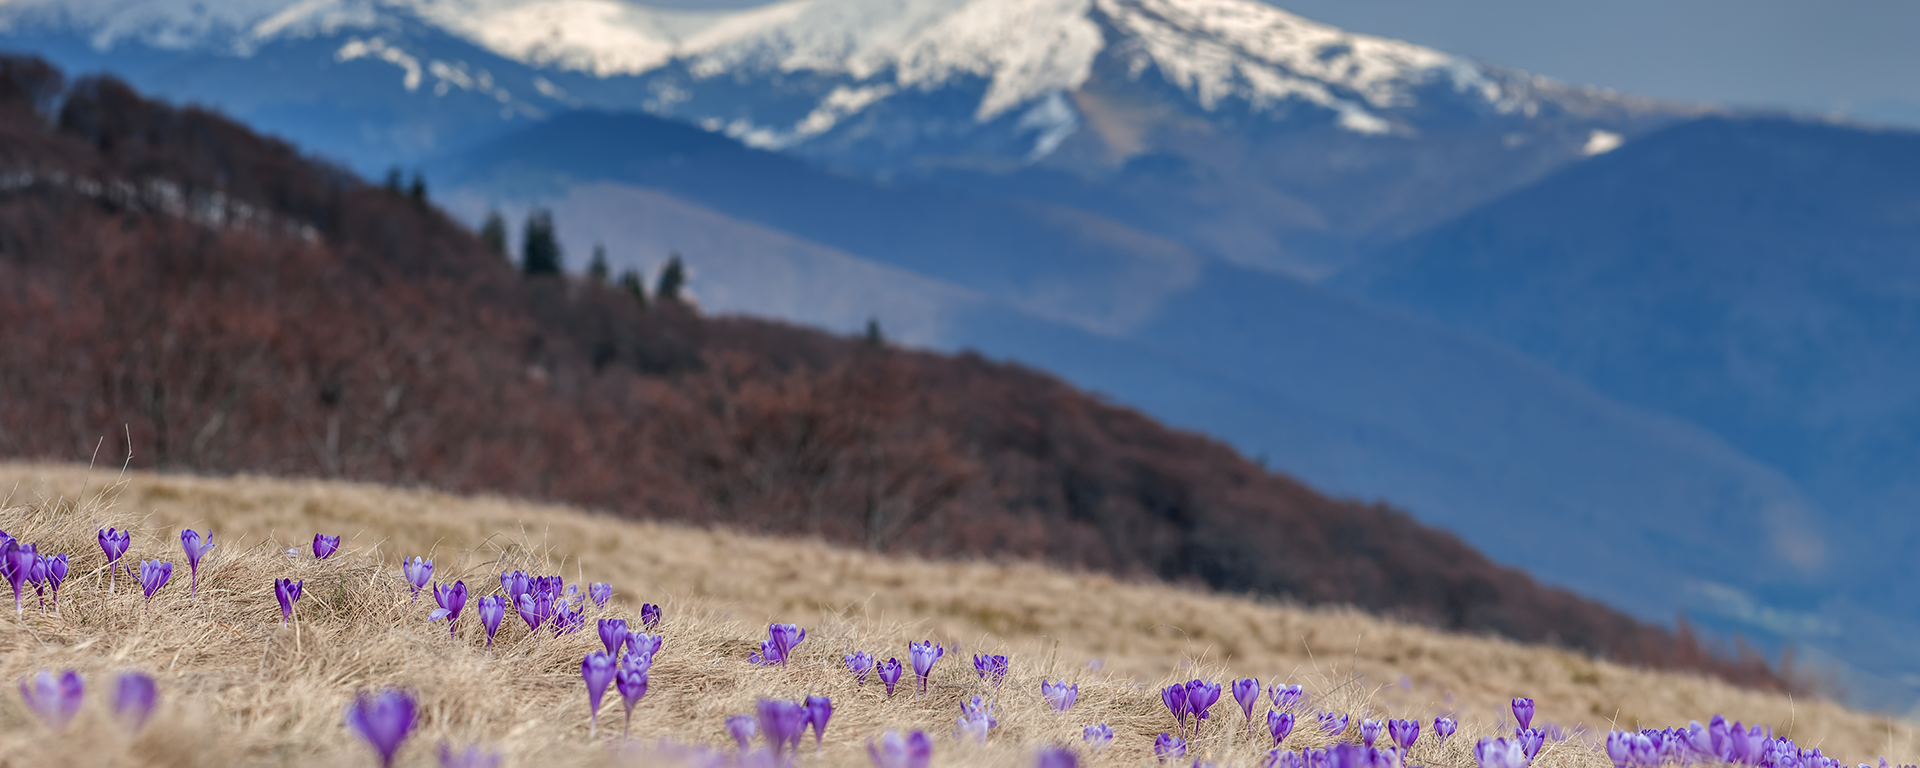 mountain crocuses emerging in the spring